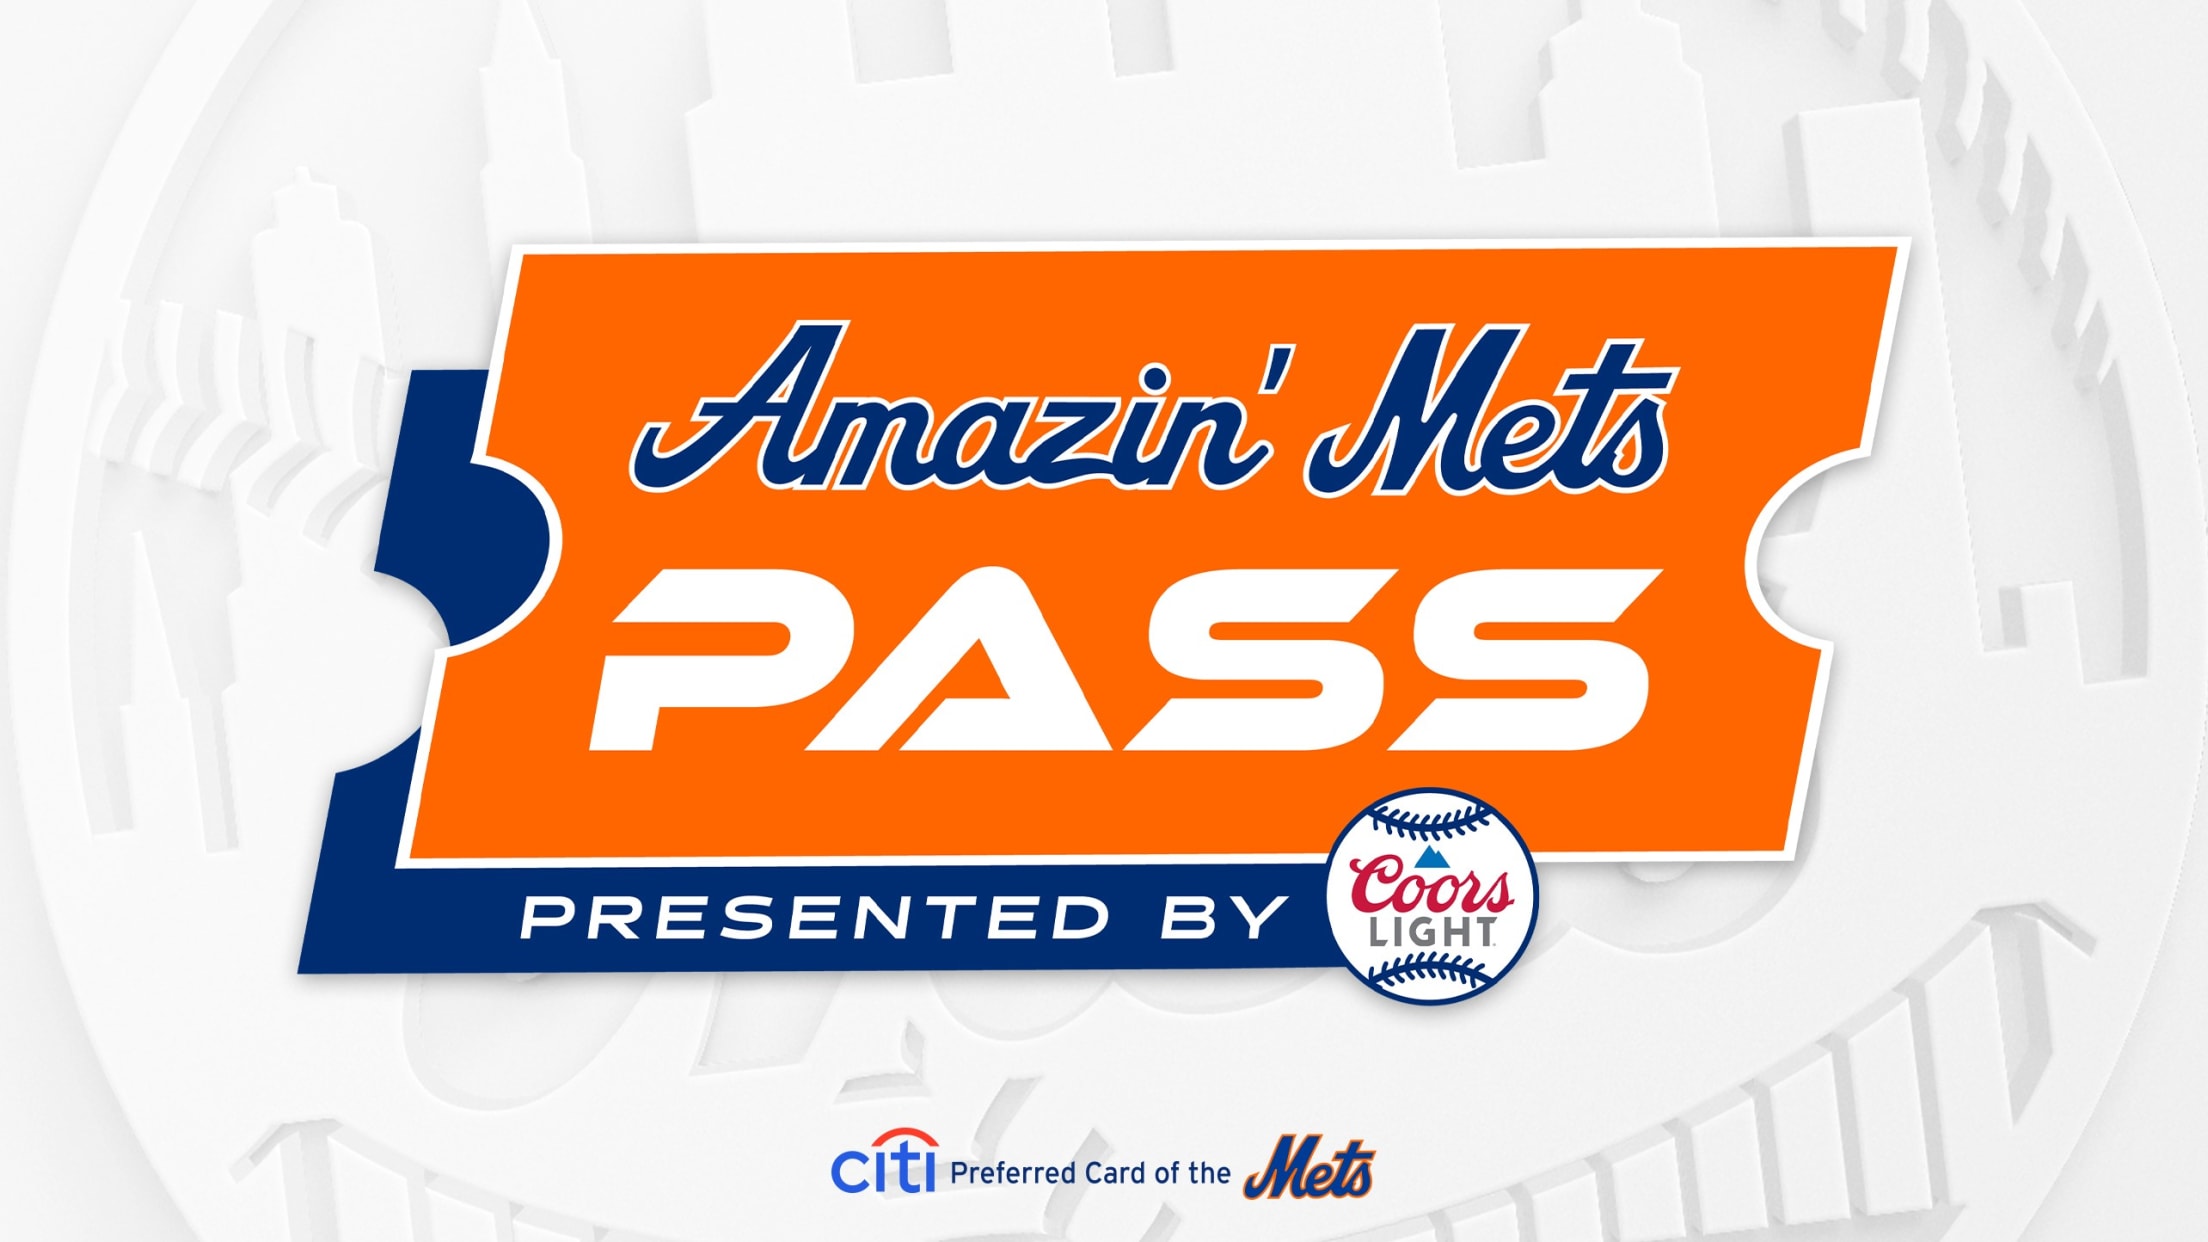 VIP Packages for New York Mets tickets